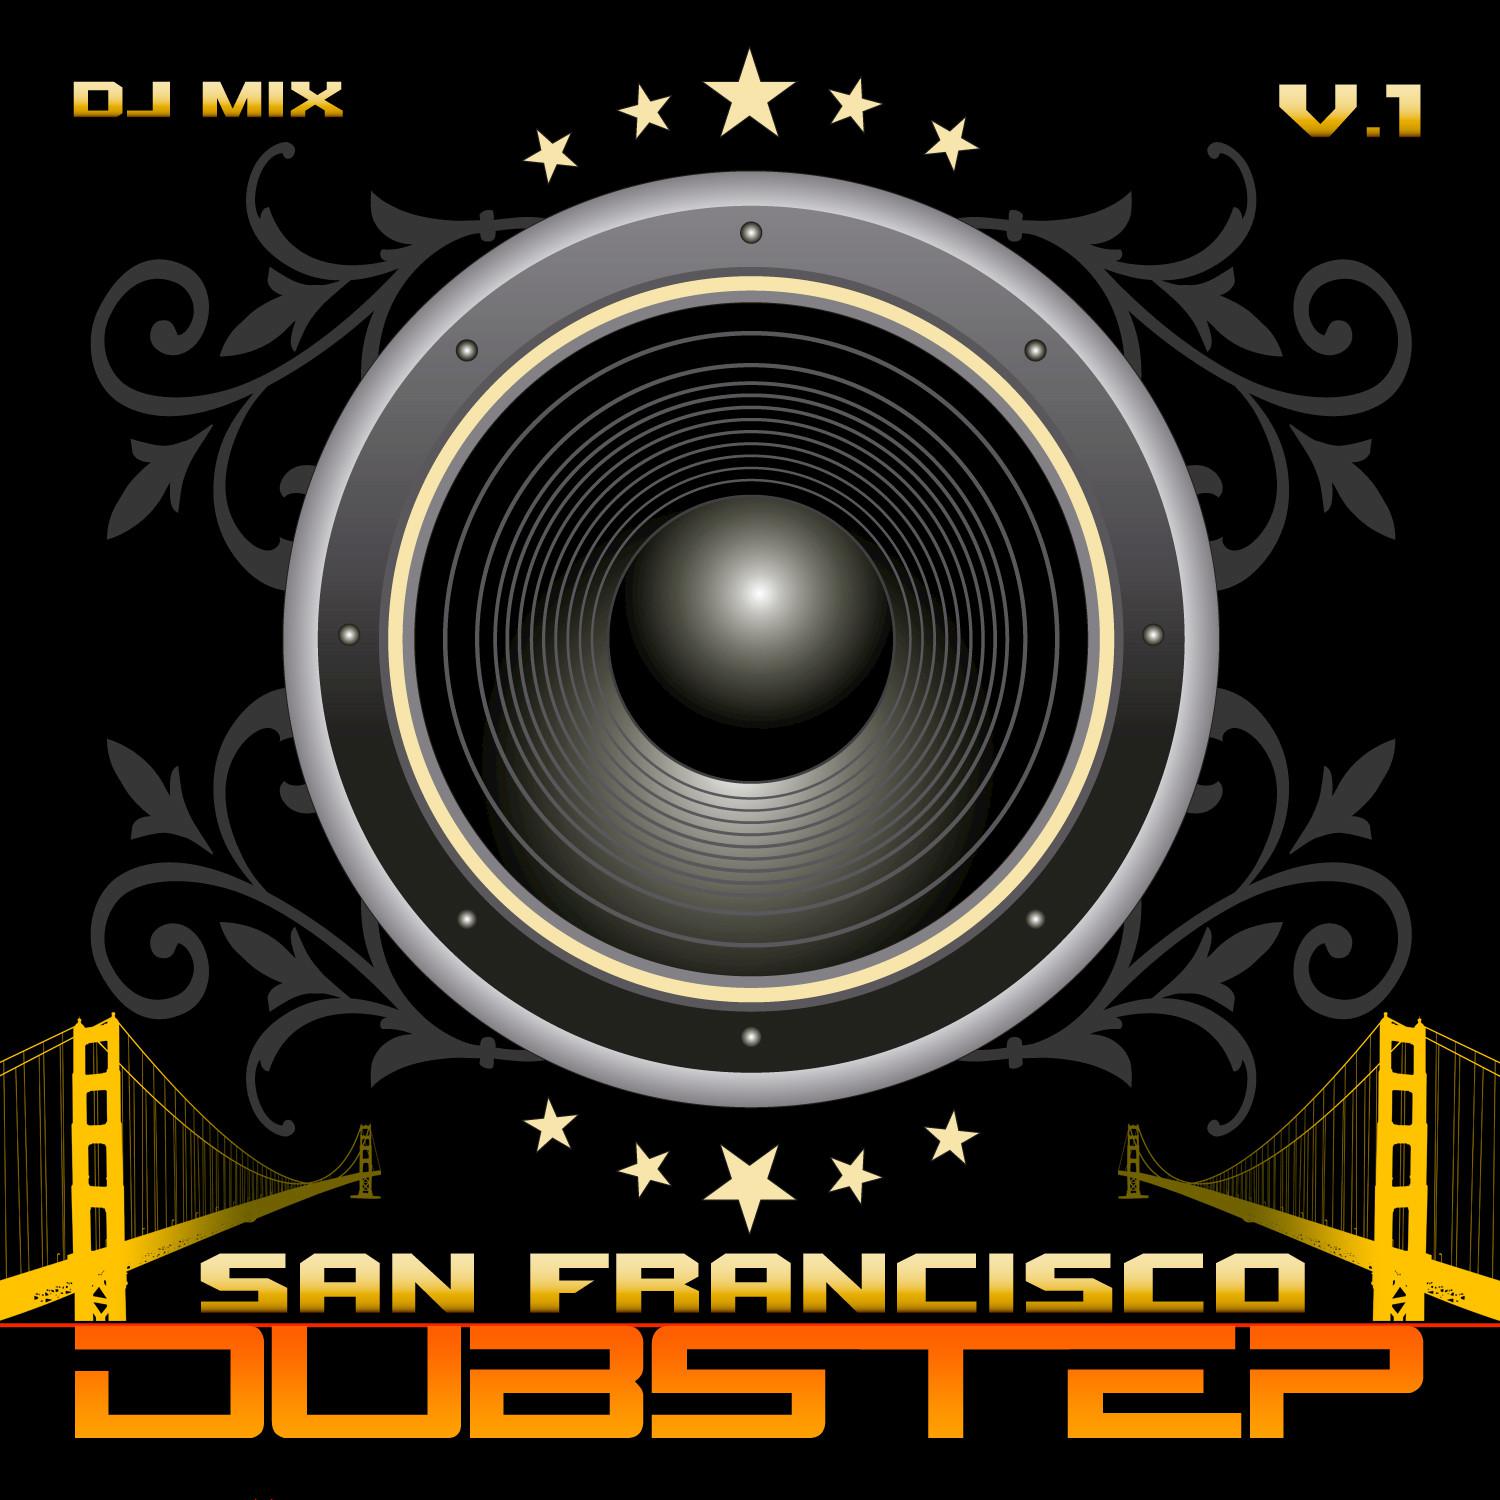 Dubstep San Francisco v.1 Best Top Electronic Dance Hits, Dub, Brostep, Psystep, Chill, Rave Anthem